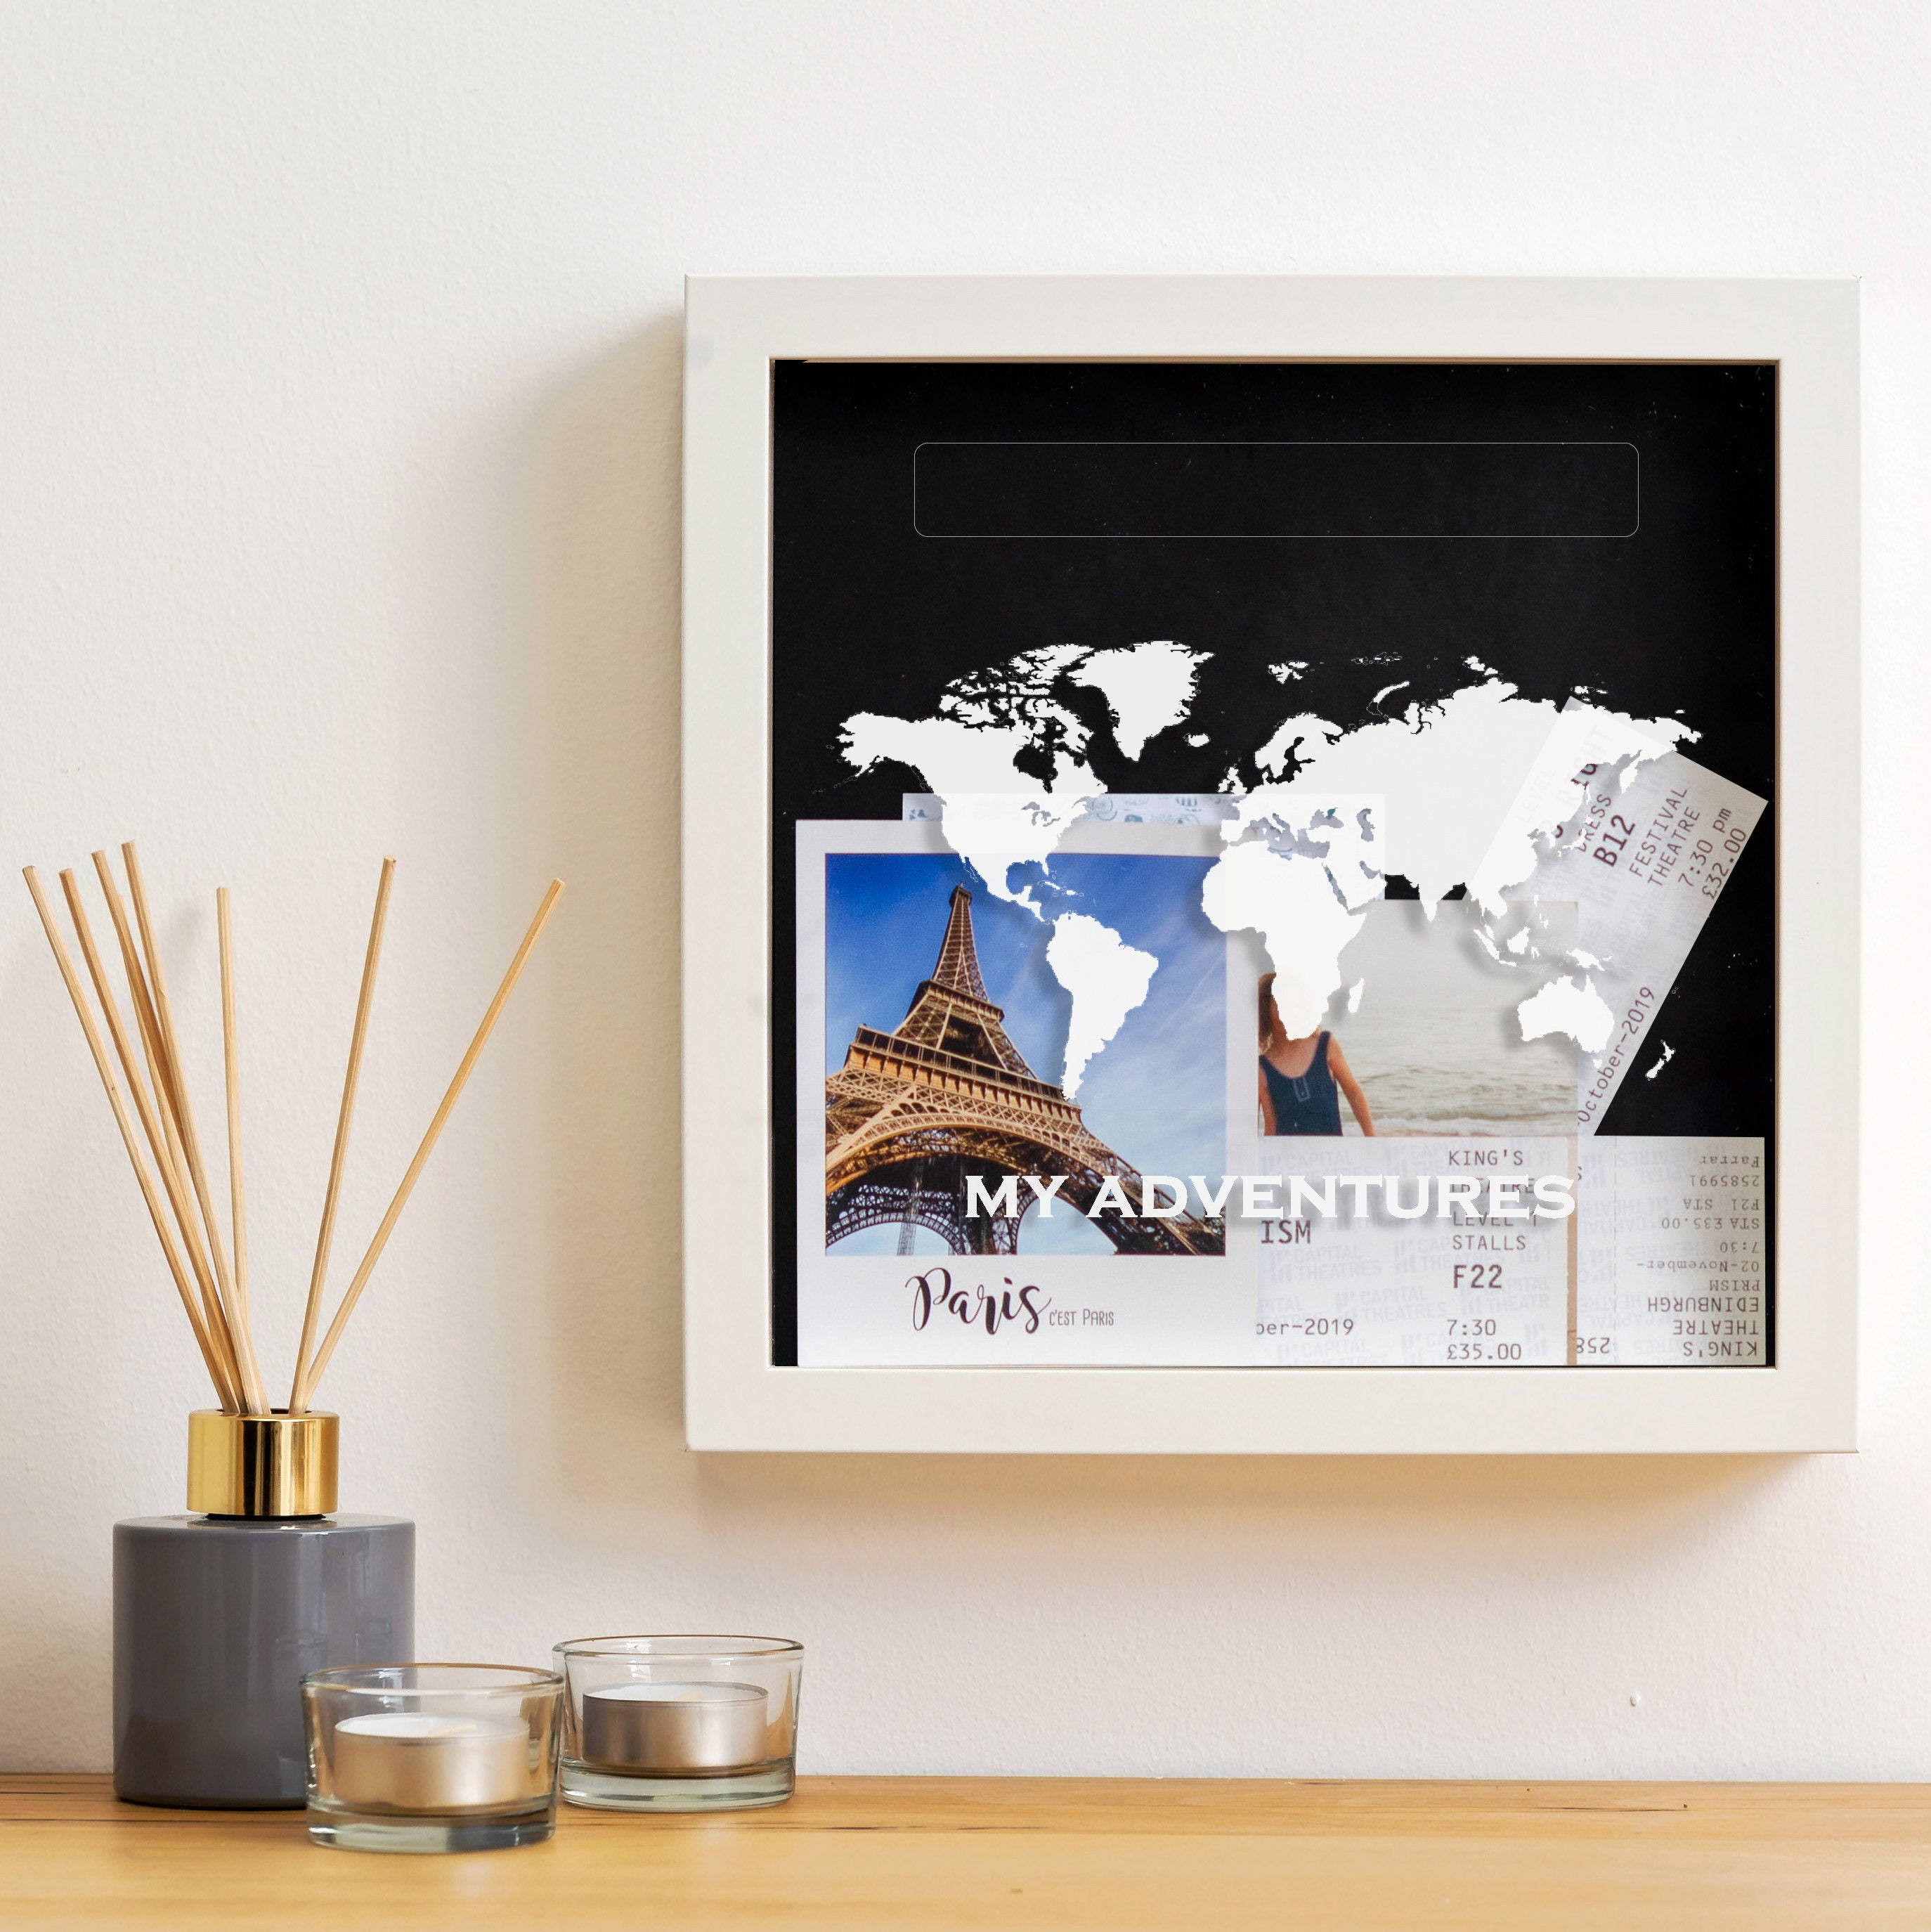 Adventures Memory Box Personalised My Adventures Memory Ticket Picture  Frame Collection Travels Memories Gifts for Him for Her Holidays 